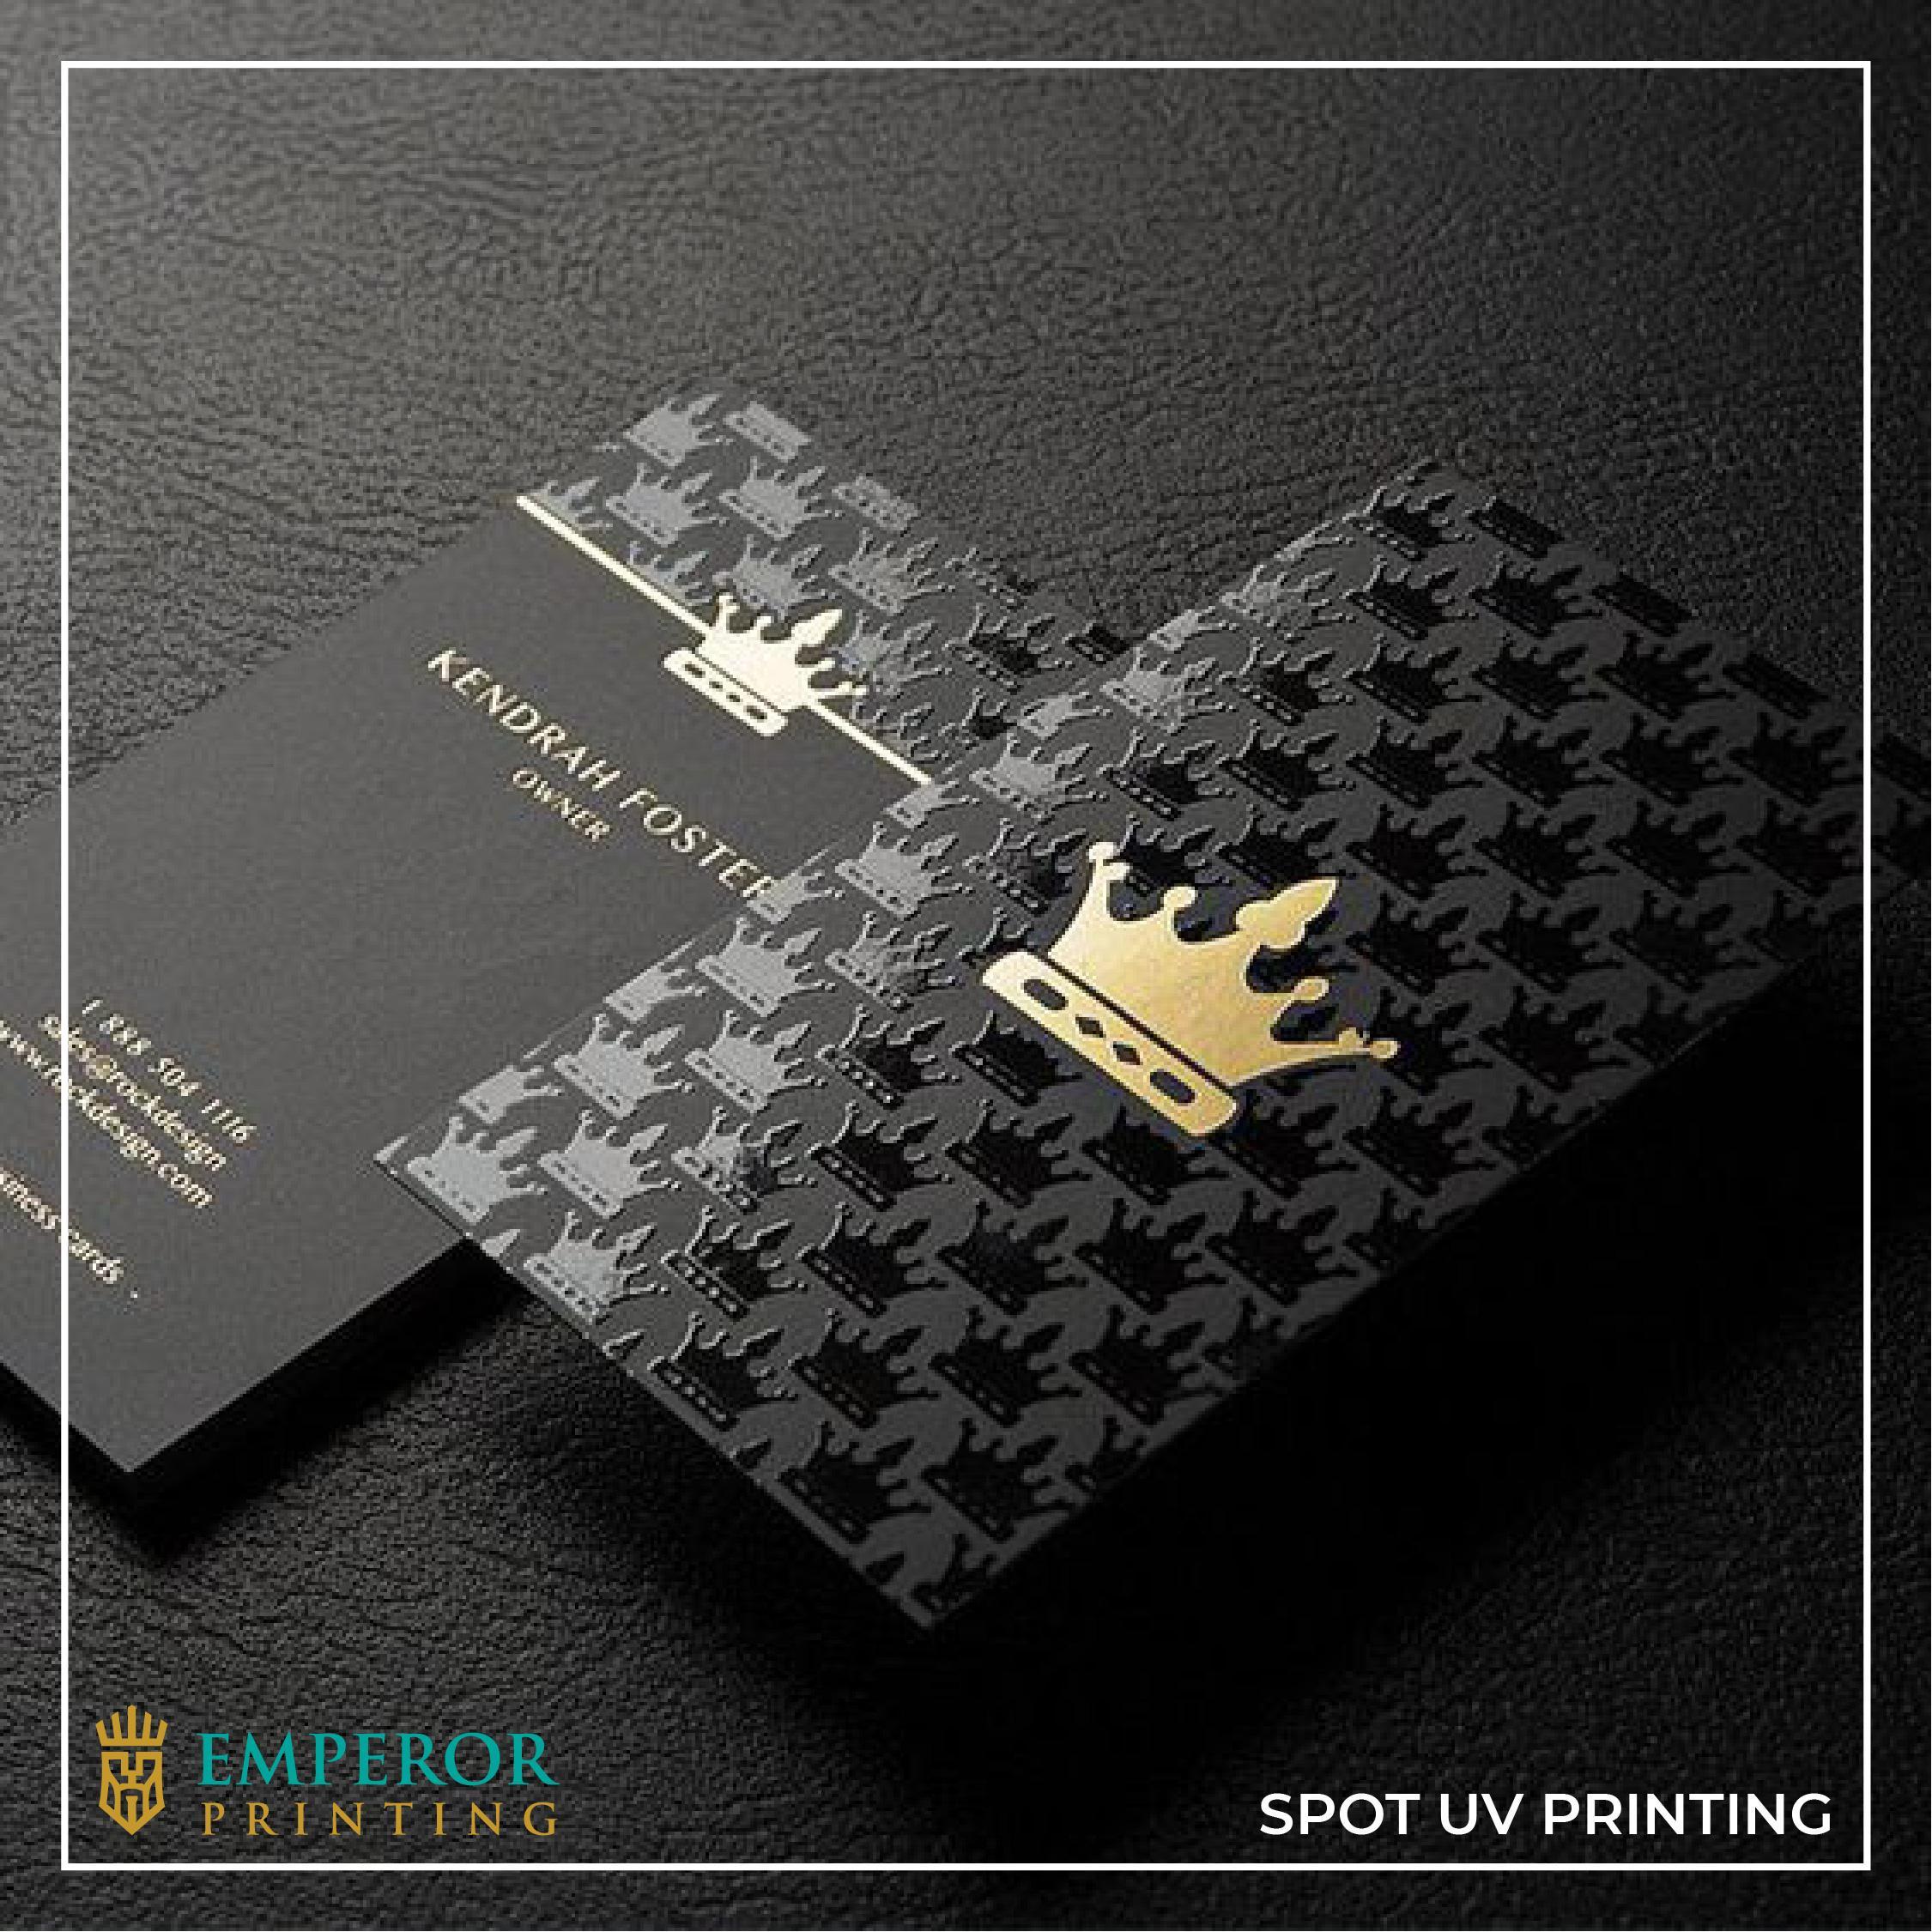 Business cards printing in Dubai- Top 5 things to know